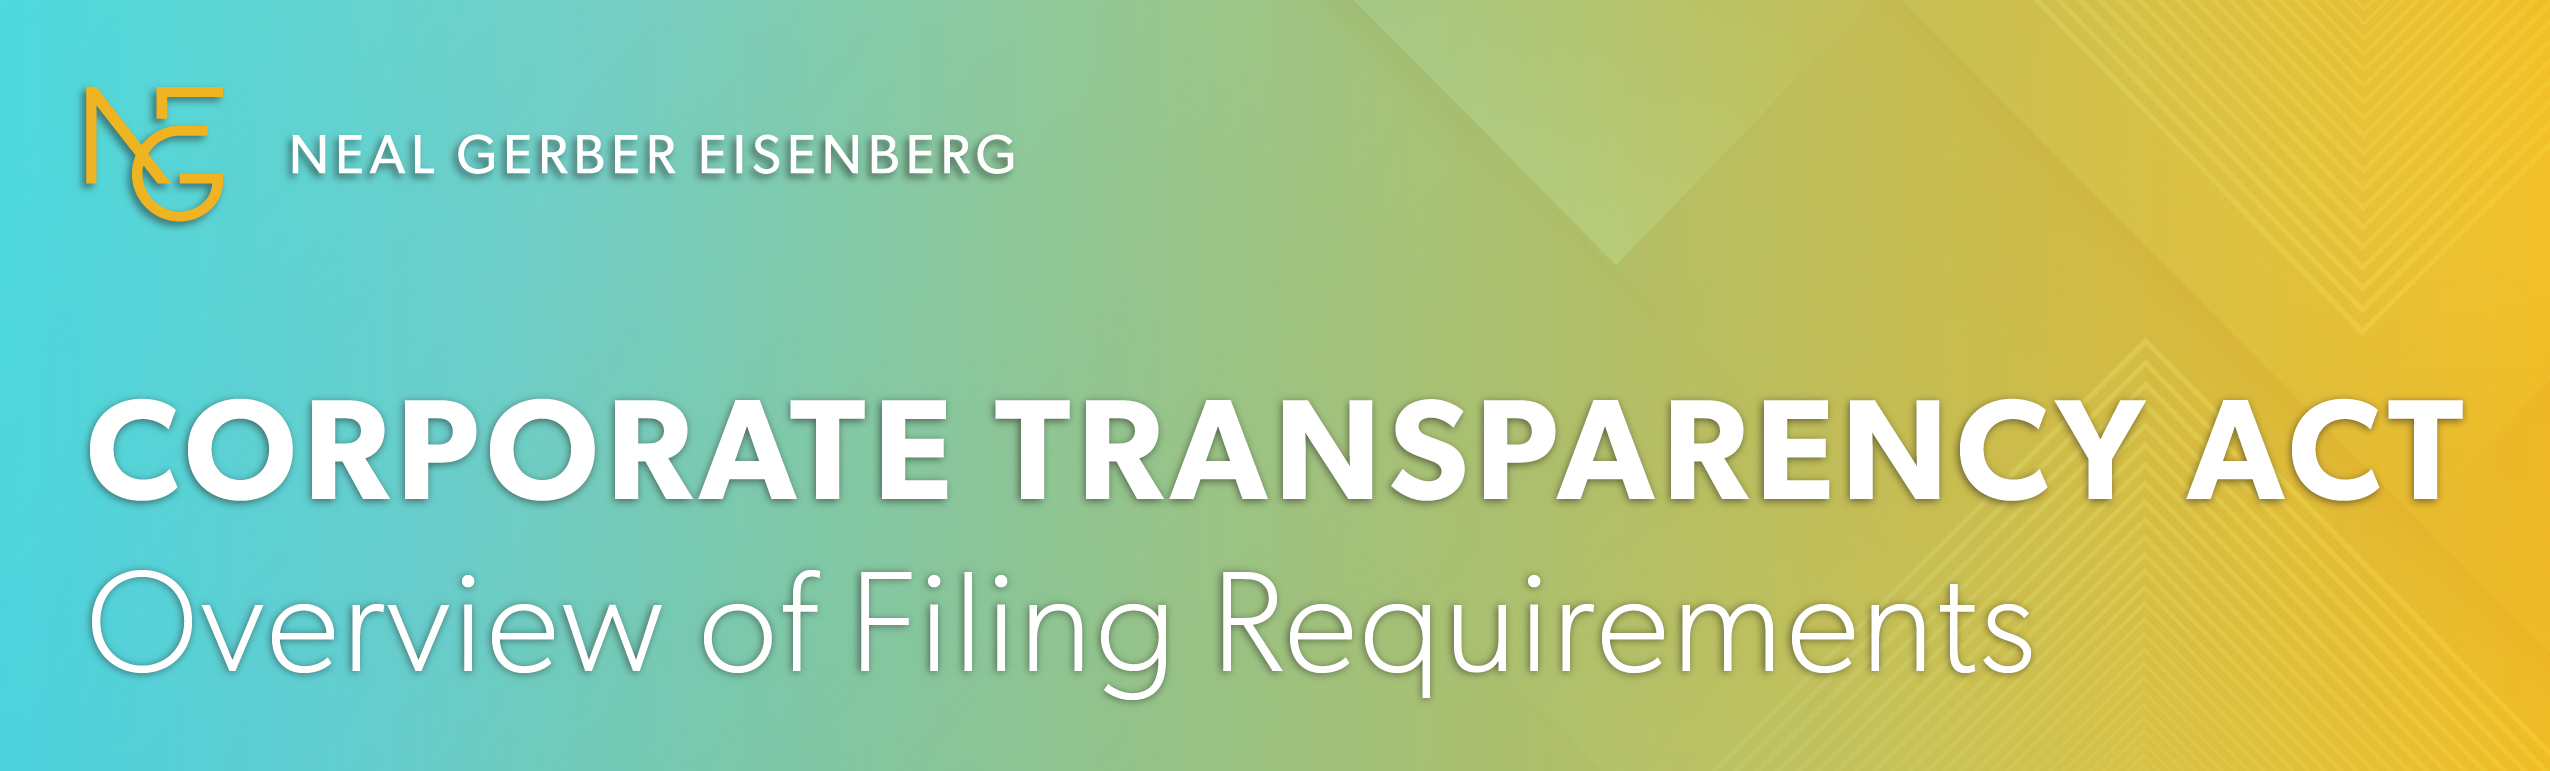 Corporate Transparency Act - Overview of Filing Requirements